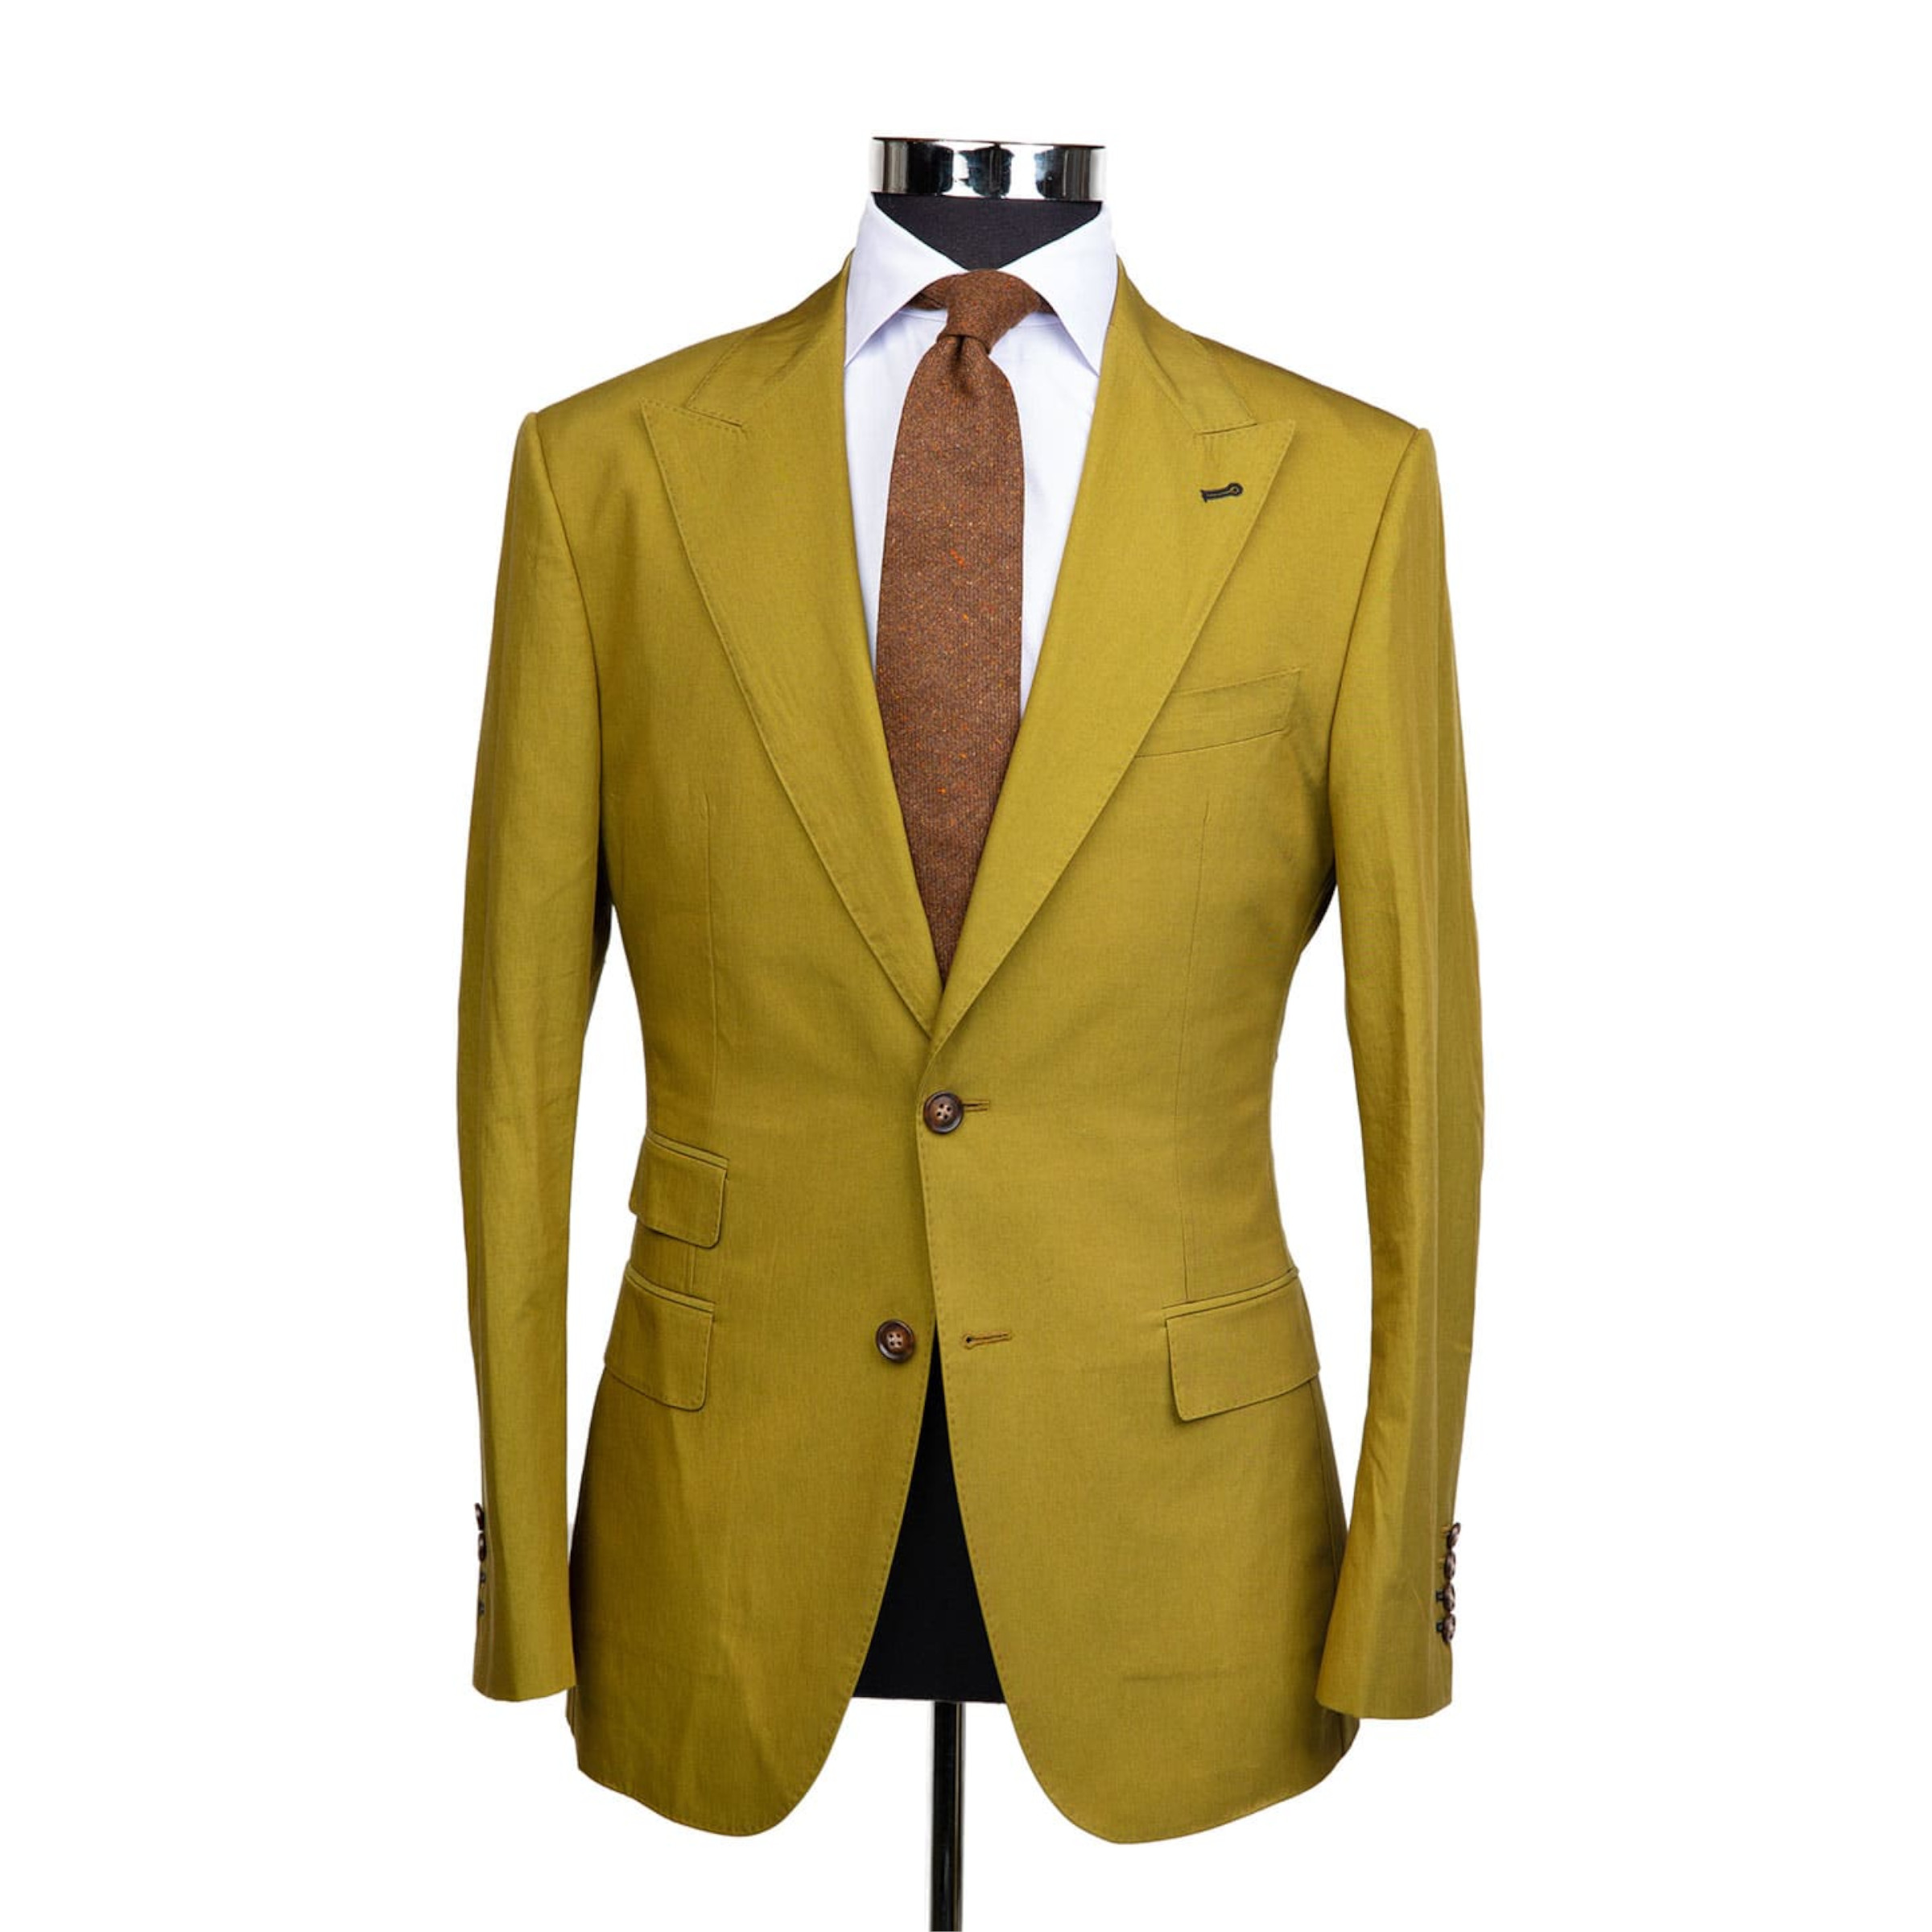 A mustard yellow suit jacket on a body form with a white shirt and a light brown speckled tie on a white background